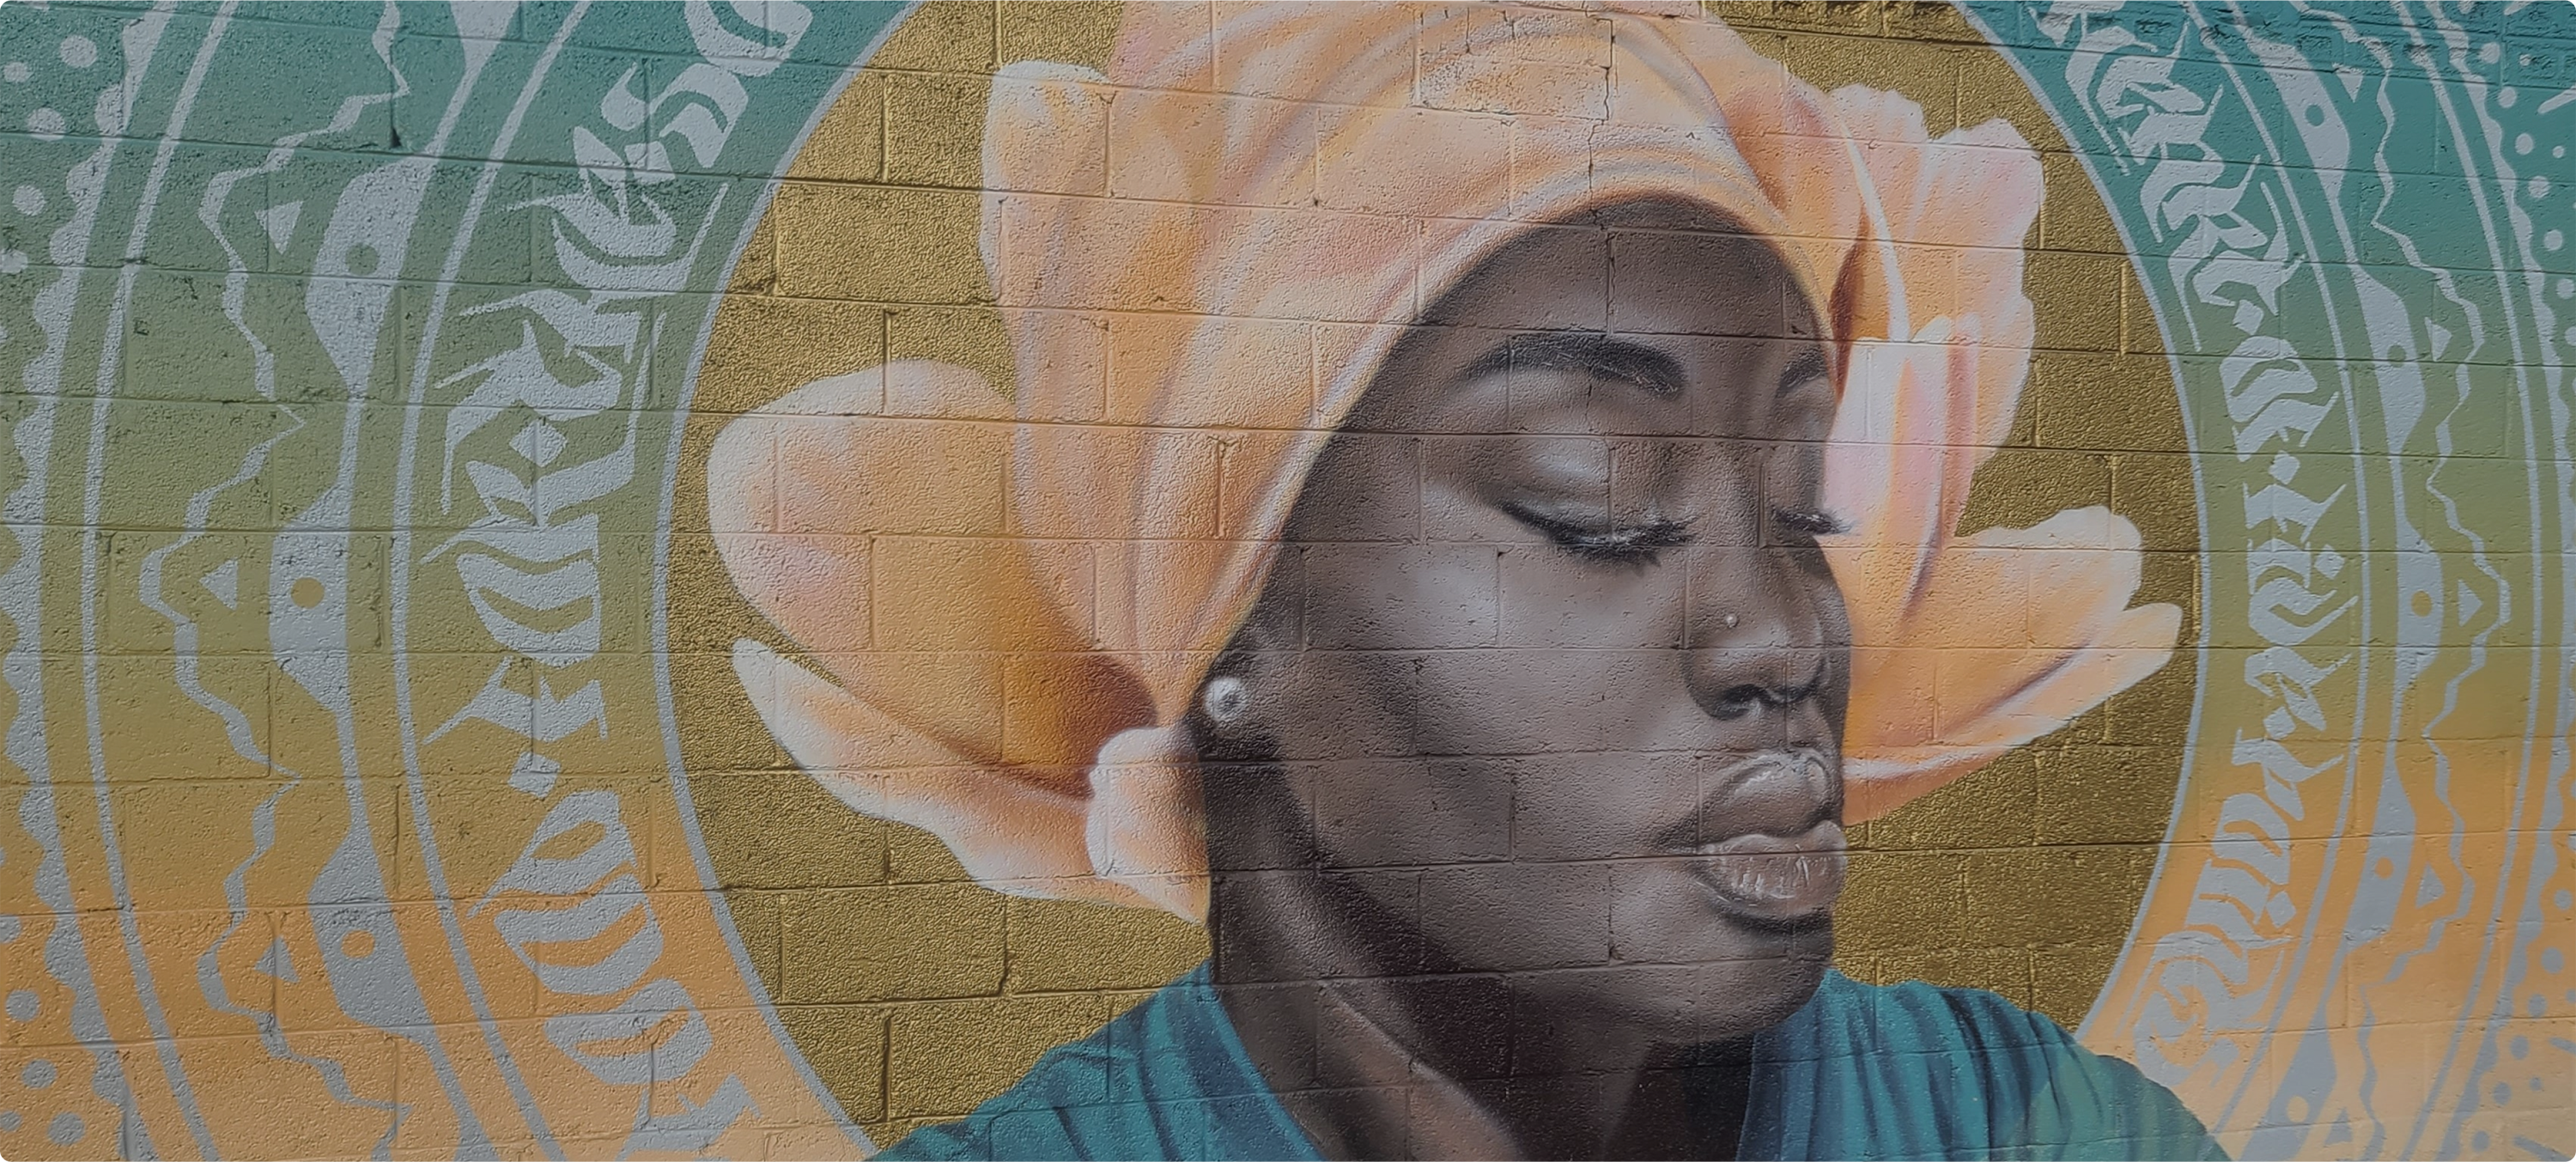 Mural of a Black woman